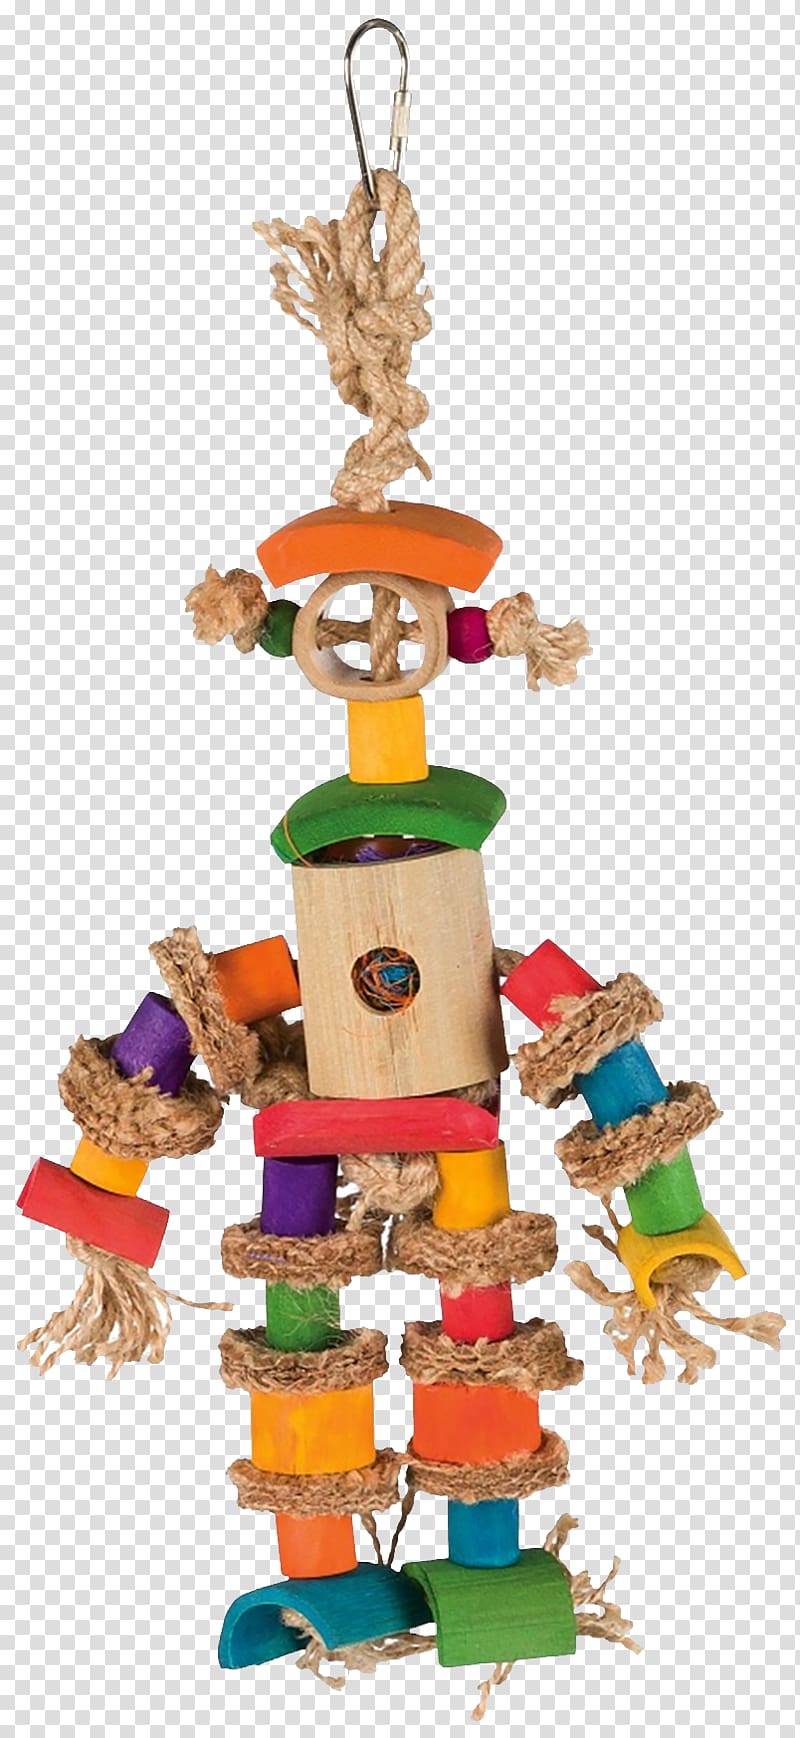 Rope Wood Toy Jute Cord, rope transparent background PNG clipart